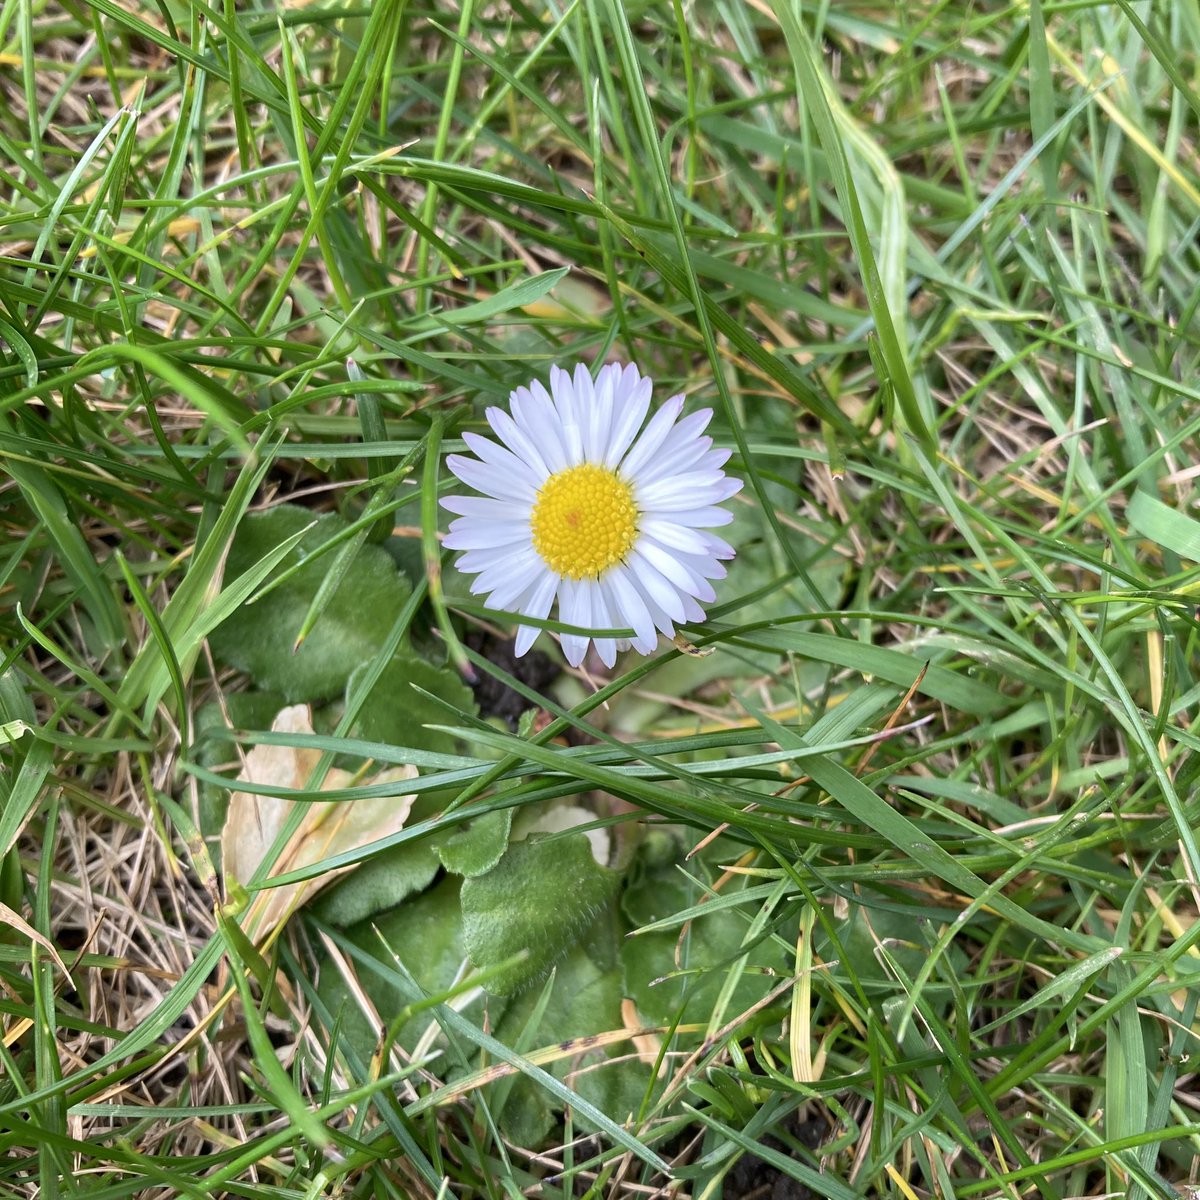 Yay, a daisy has appeared in my burgeoning #lawnmeadow. It’s only been mown once in the last 18 months. #rewilding